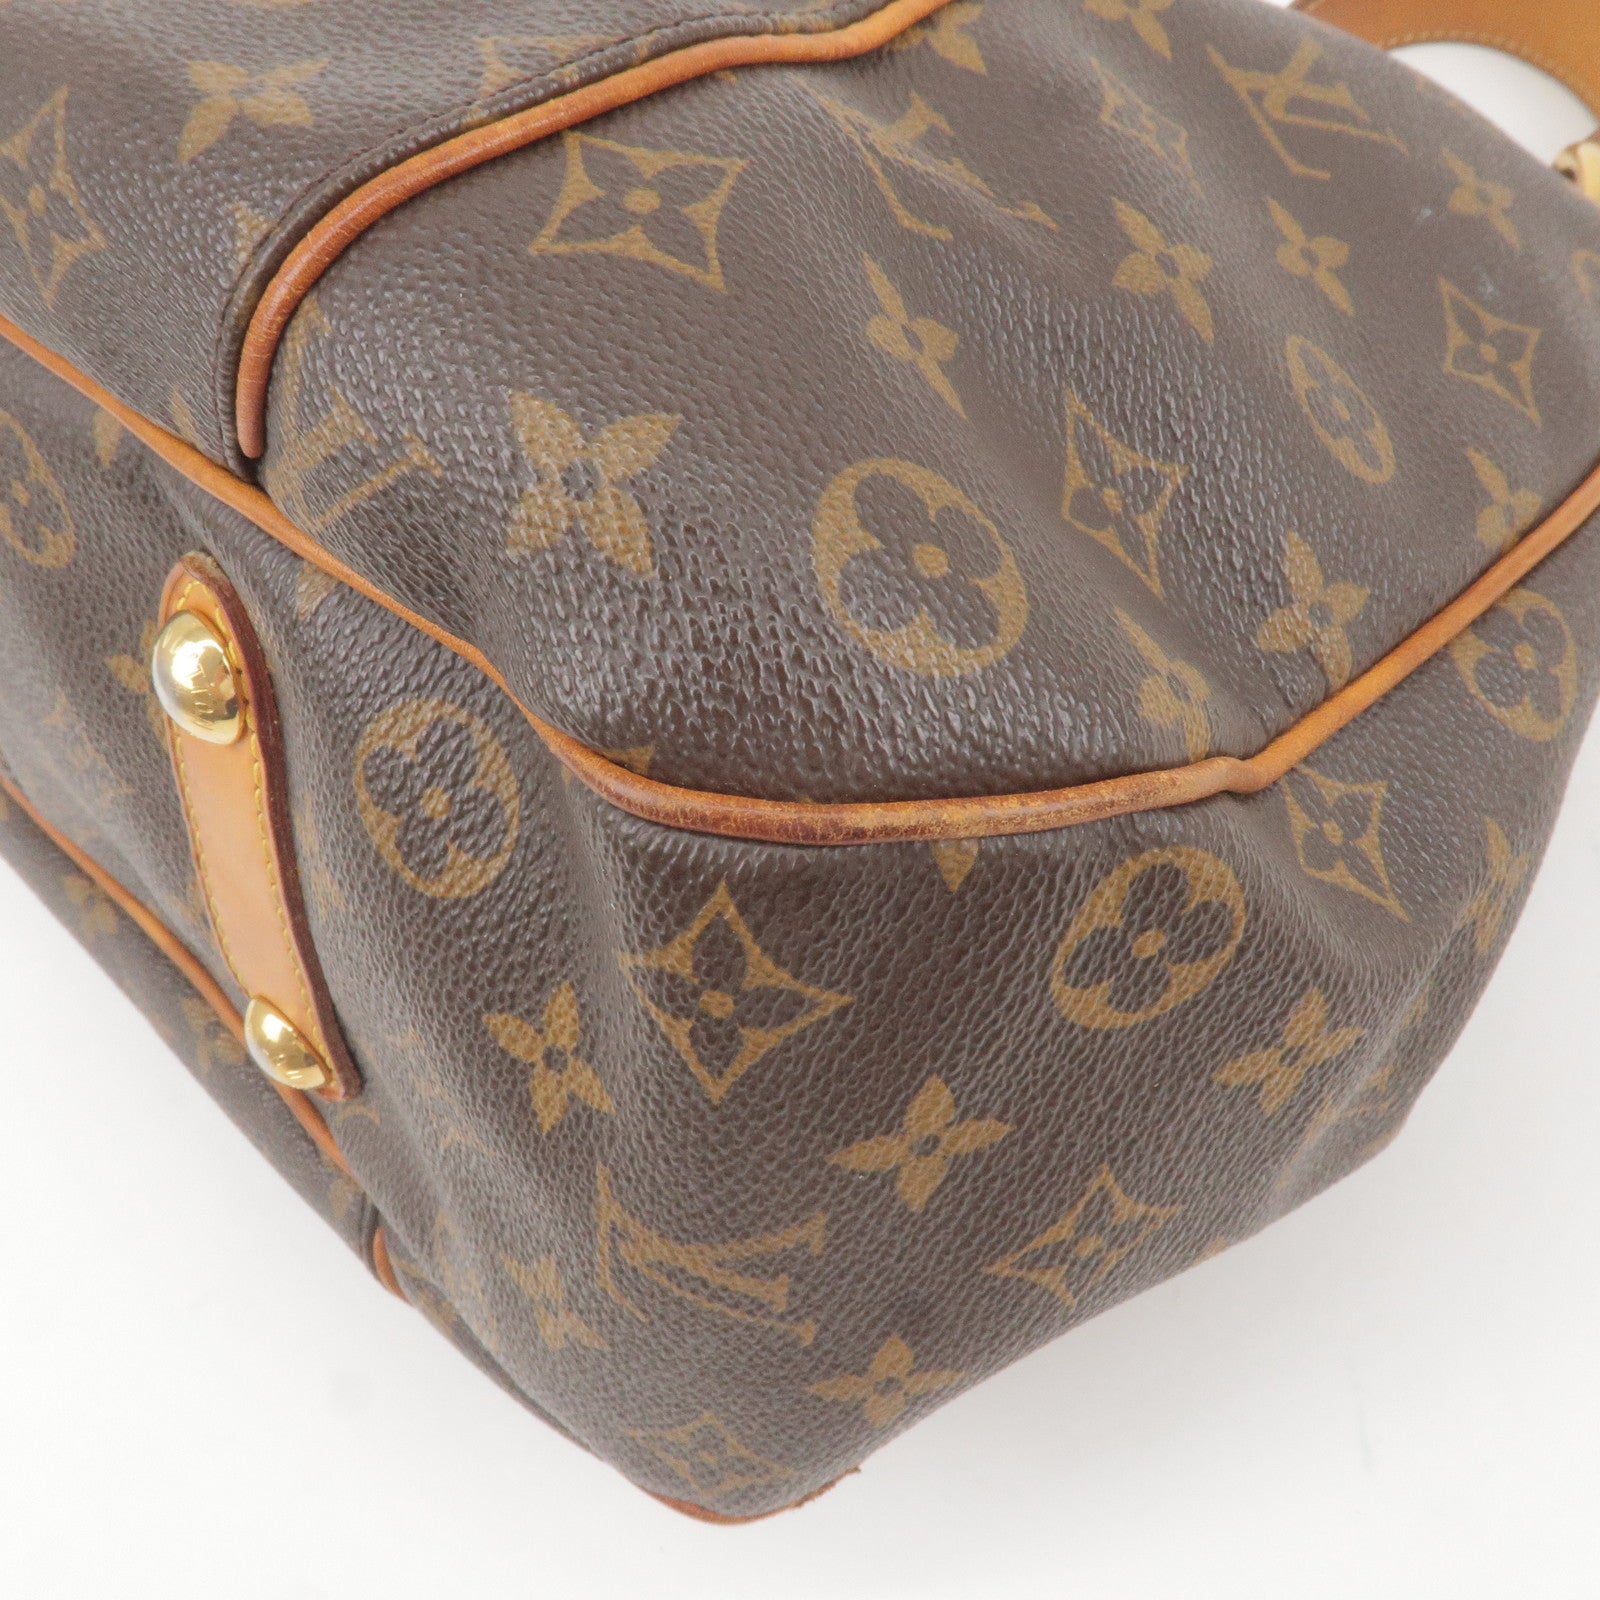 Louis Vuitton Pre-Owned White Damier Azur Keepall 50 Canvas Travel Bag, Best Price and Reviews